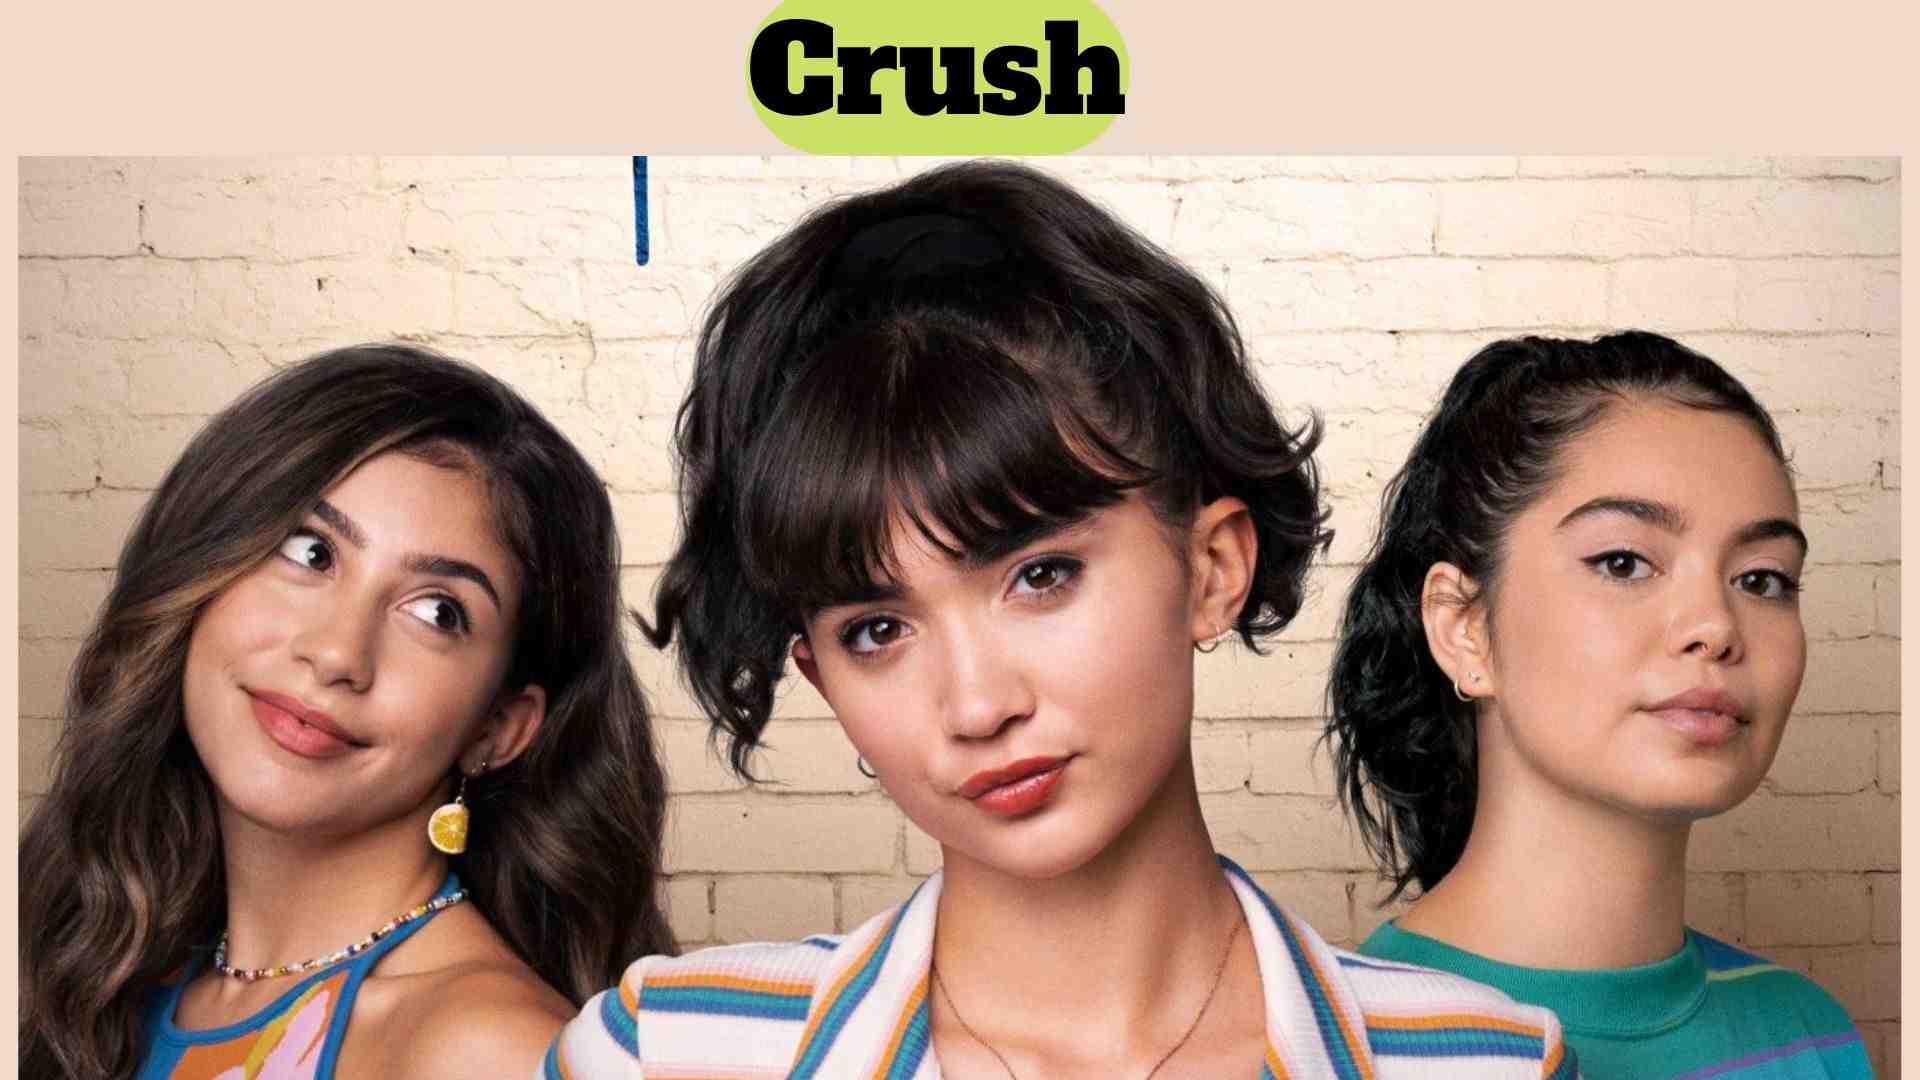 Crush Parents Guide and Age Rating | 2022